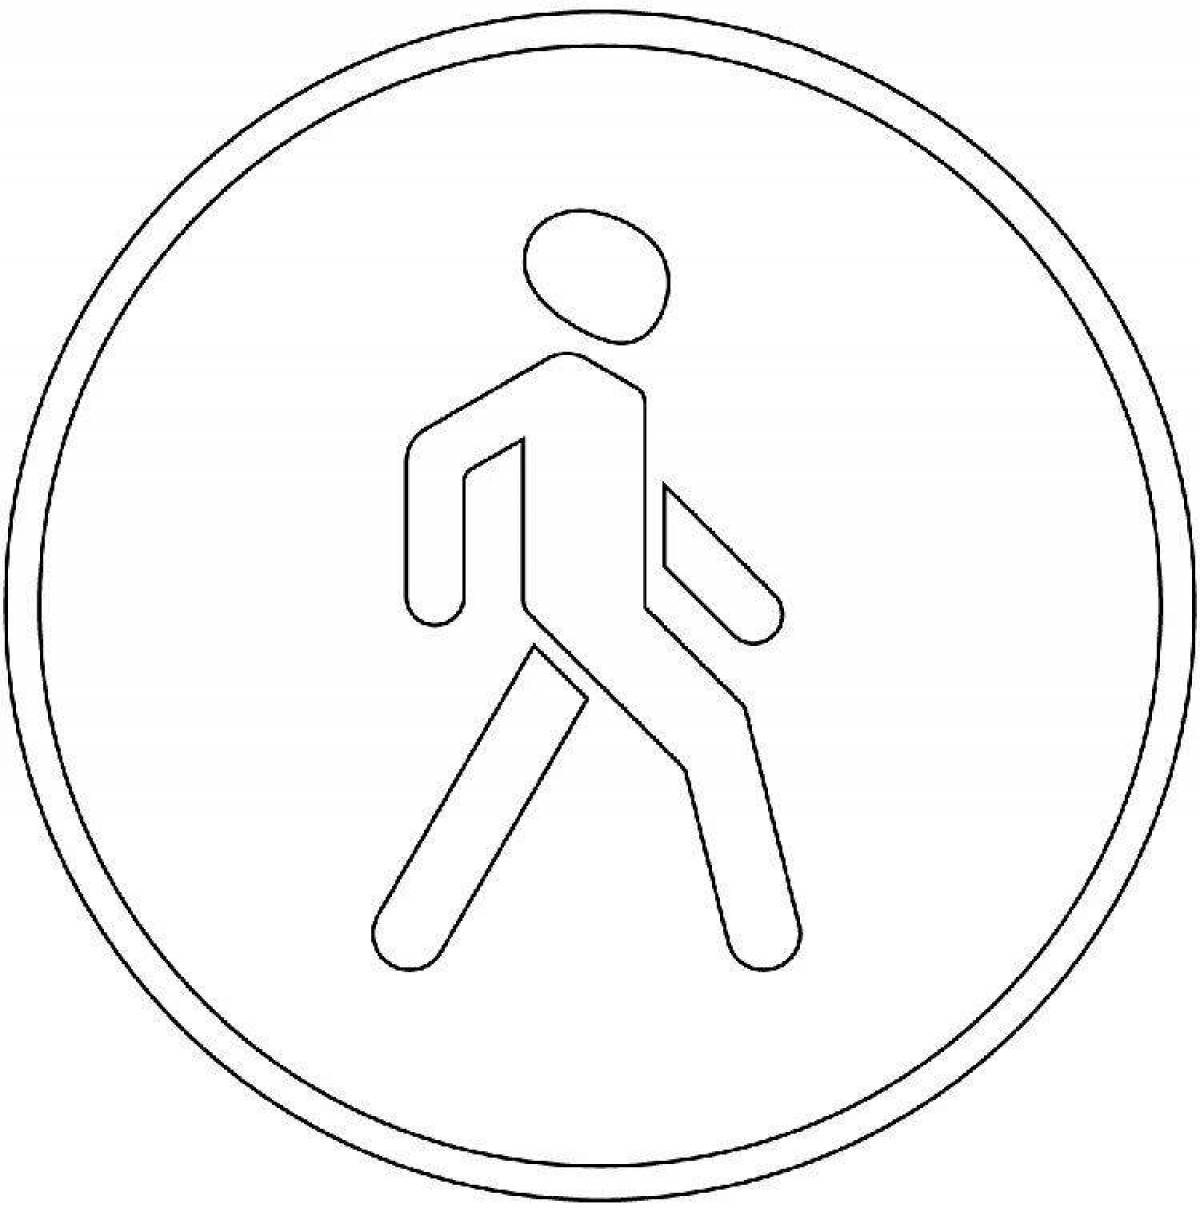 Attractive No Pedestrian Traffic Sign Coloring Page